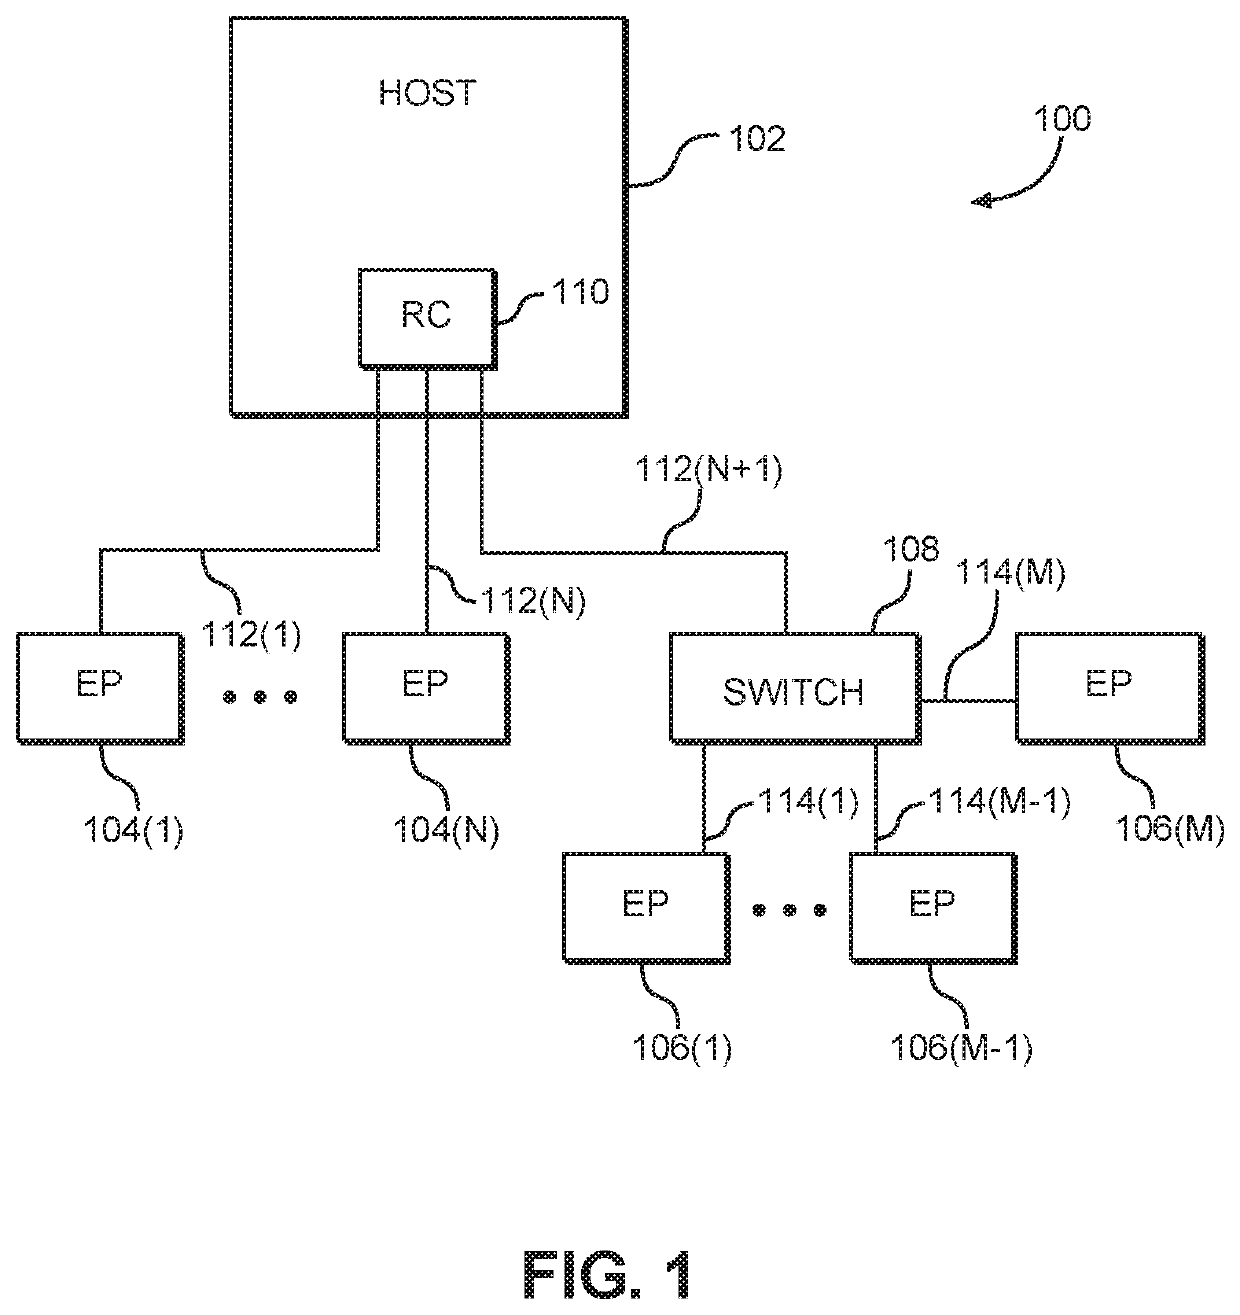 Safe handling of link errors in a peripheral component interconnect express (PCIE) device